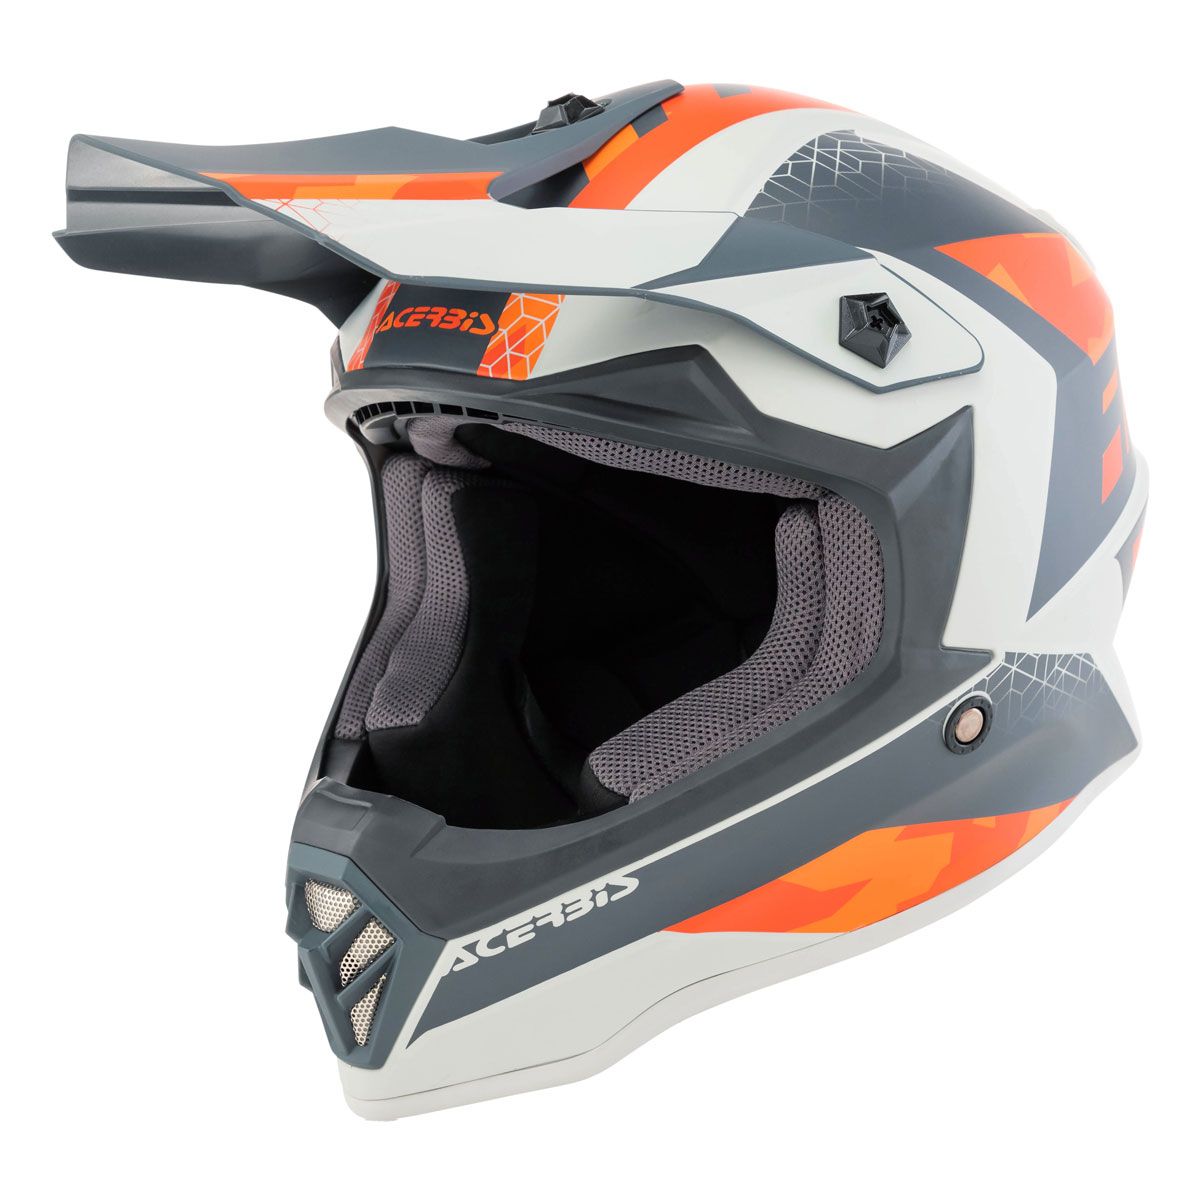 Casque Intégral Enfant Thunder Solid Kids by MT Helmets - RIDERPACK